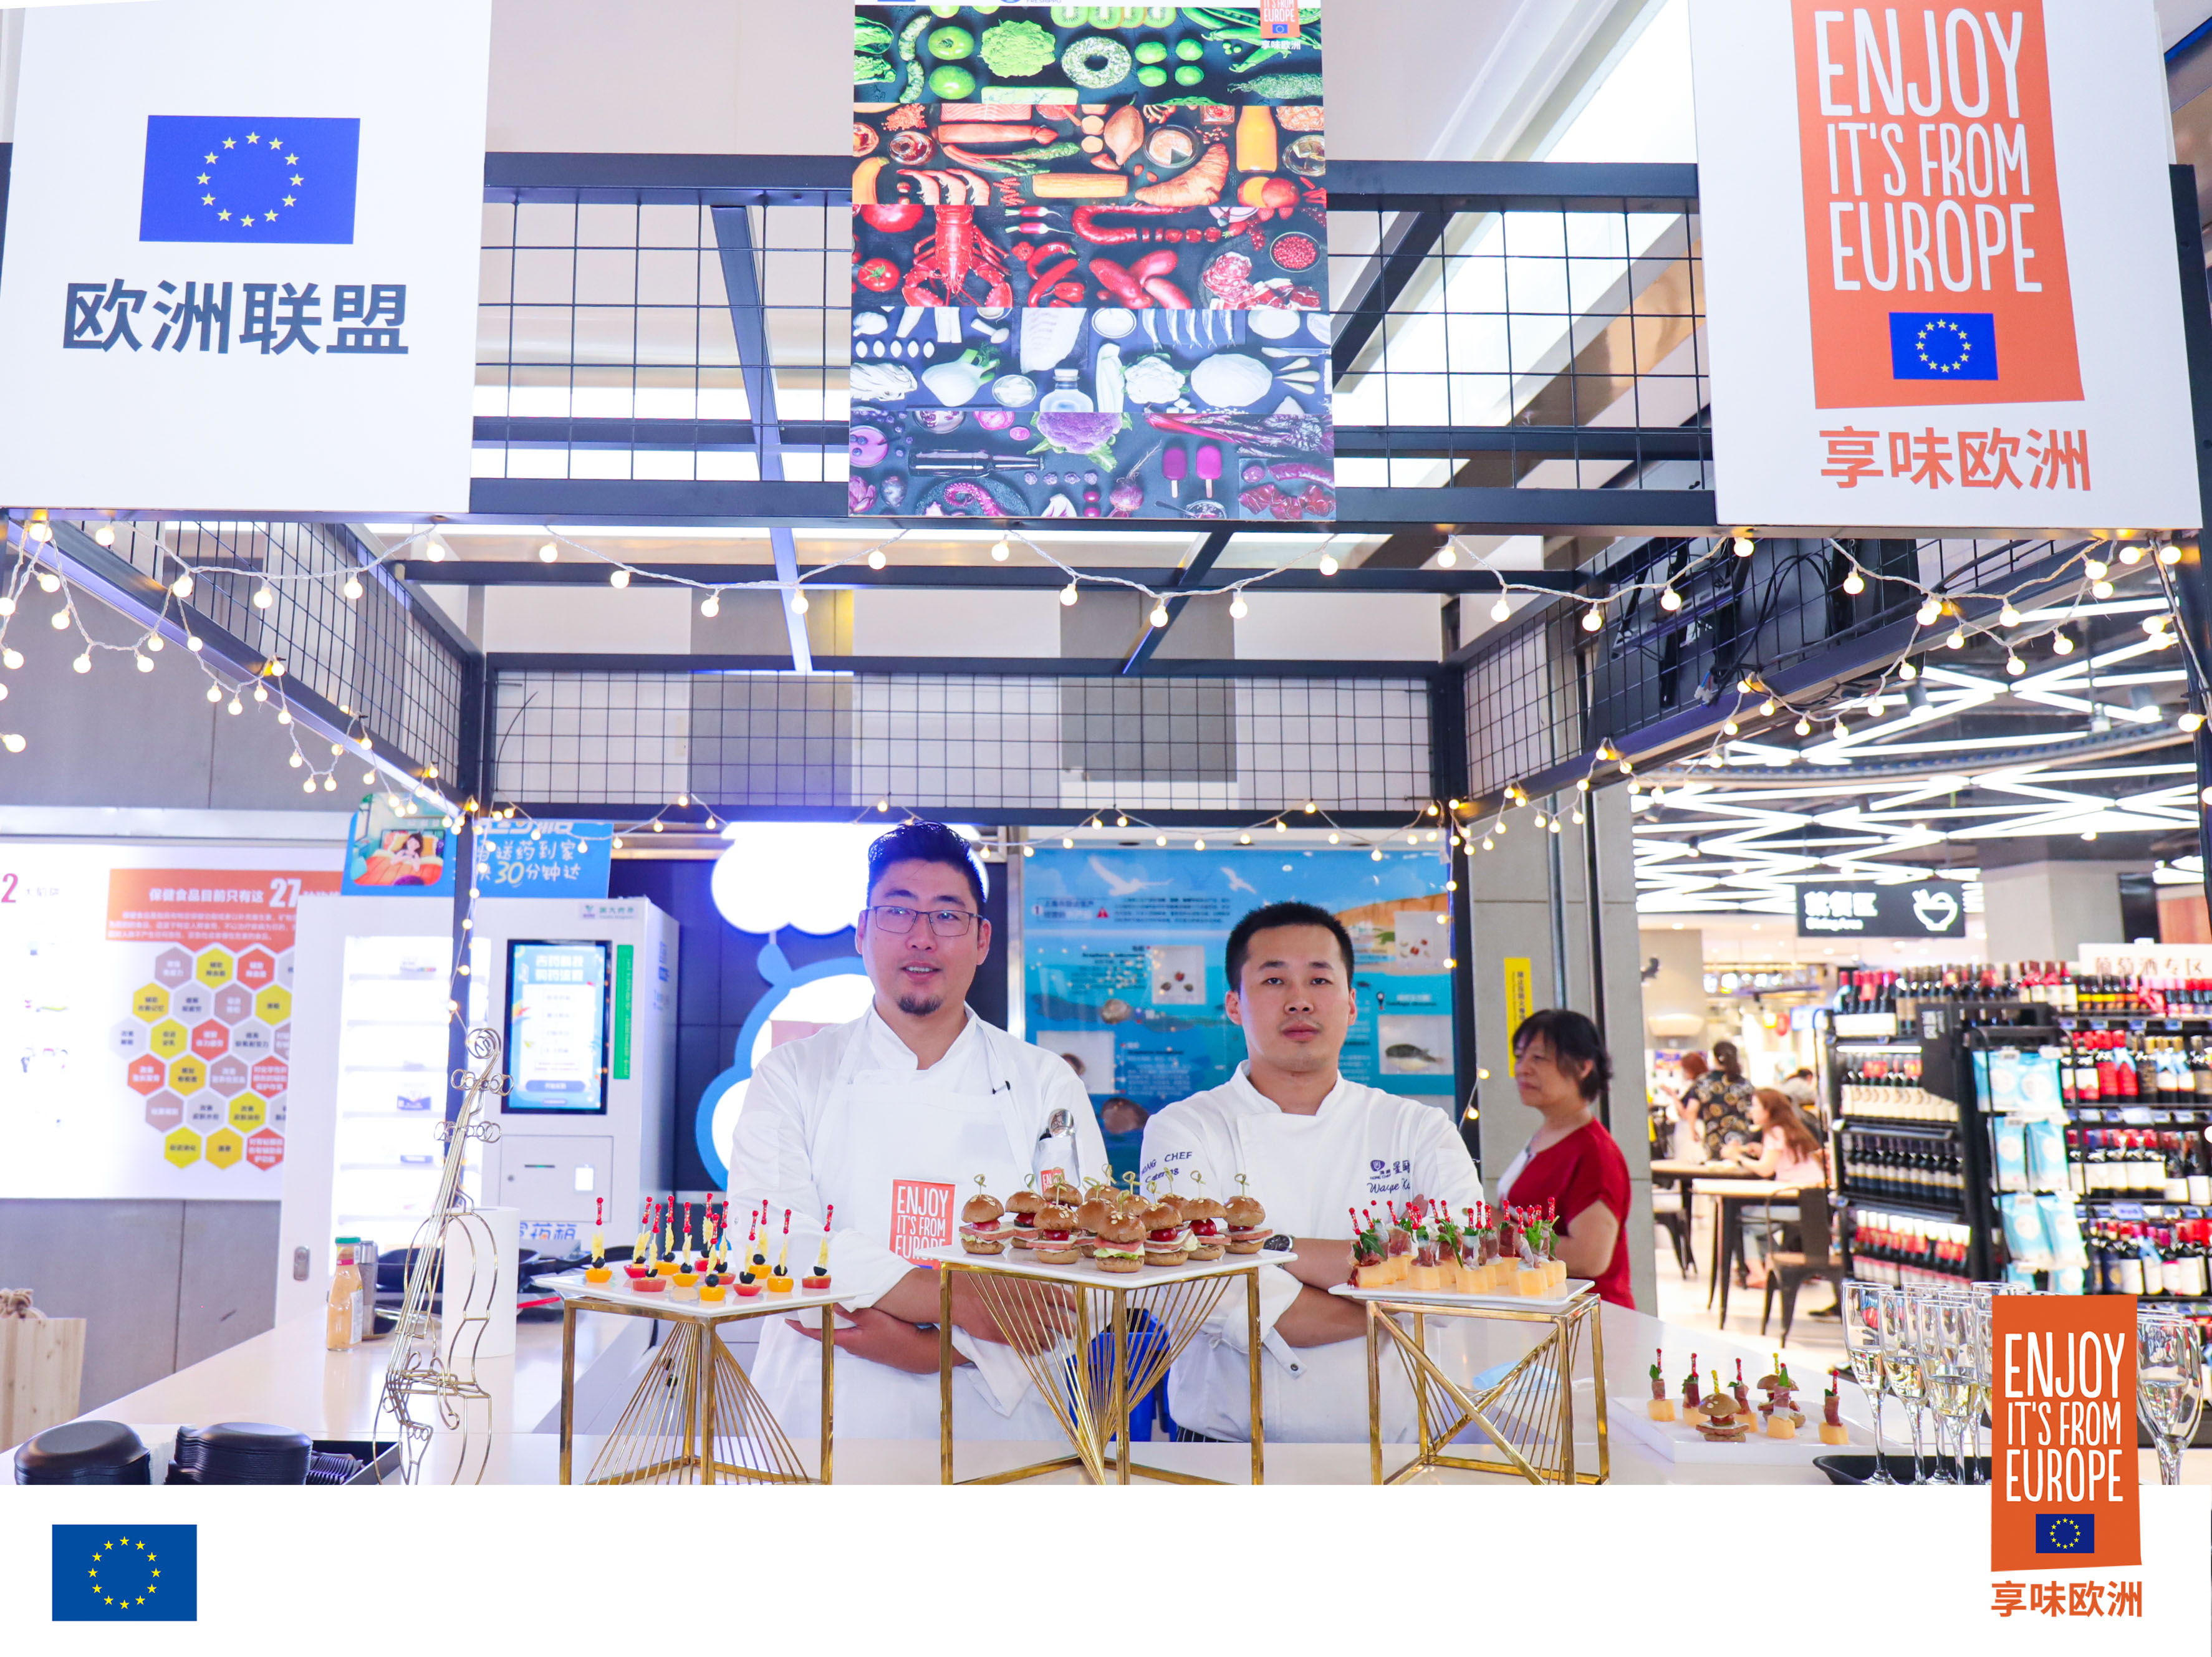 Stand with finger food presented by Chinese representatives